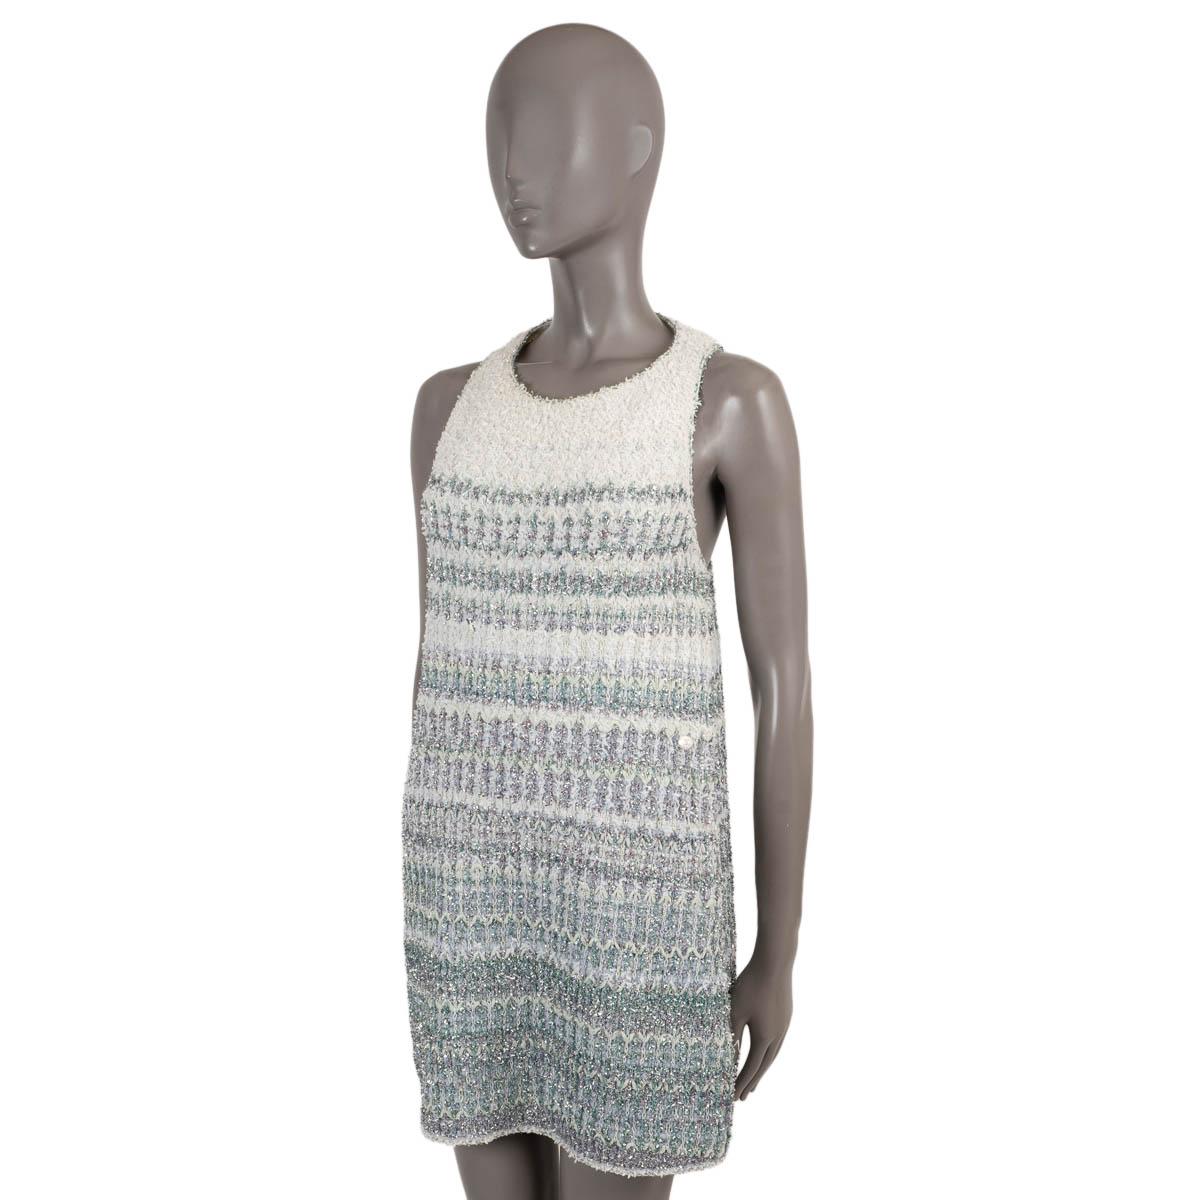 100% authentic Chanel waterfall lurex sleeveless knit dress in ivory and blue cashmere (39%), polyamide (27%), cotton (23%), polyester (6%) and silk (5%) - please note the content tag is missing. Features an A-line silhouette, round neck and